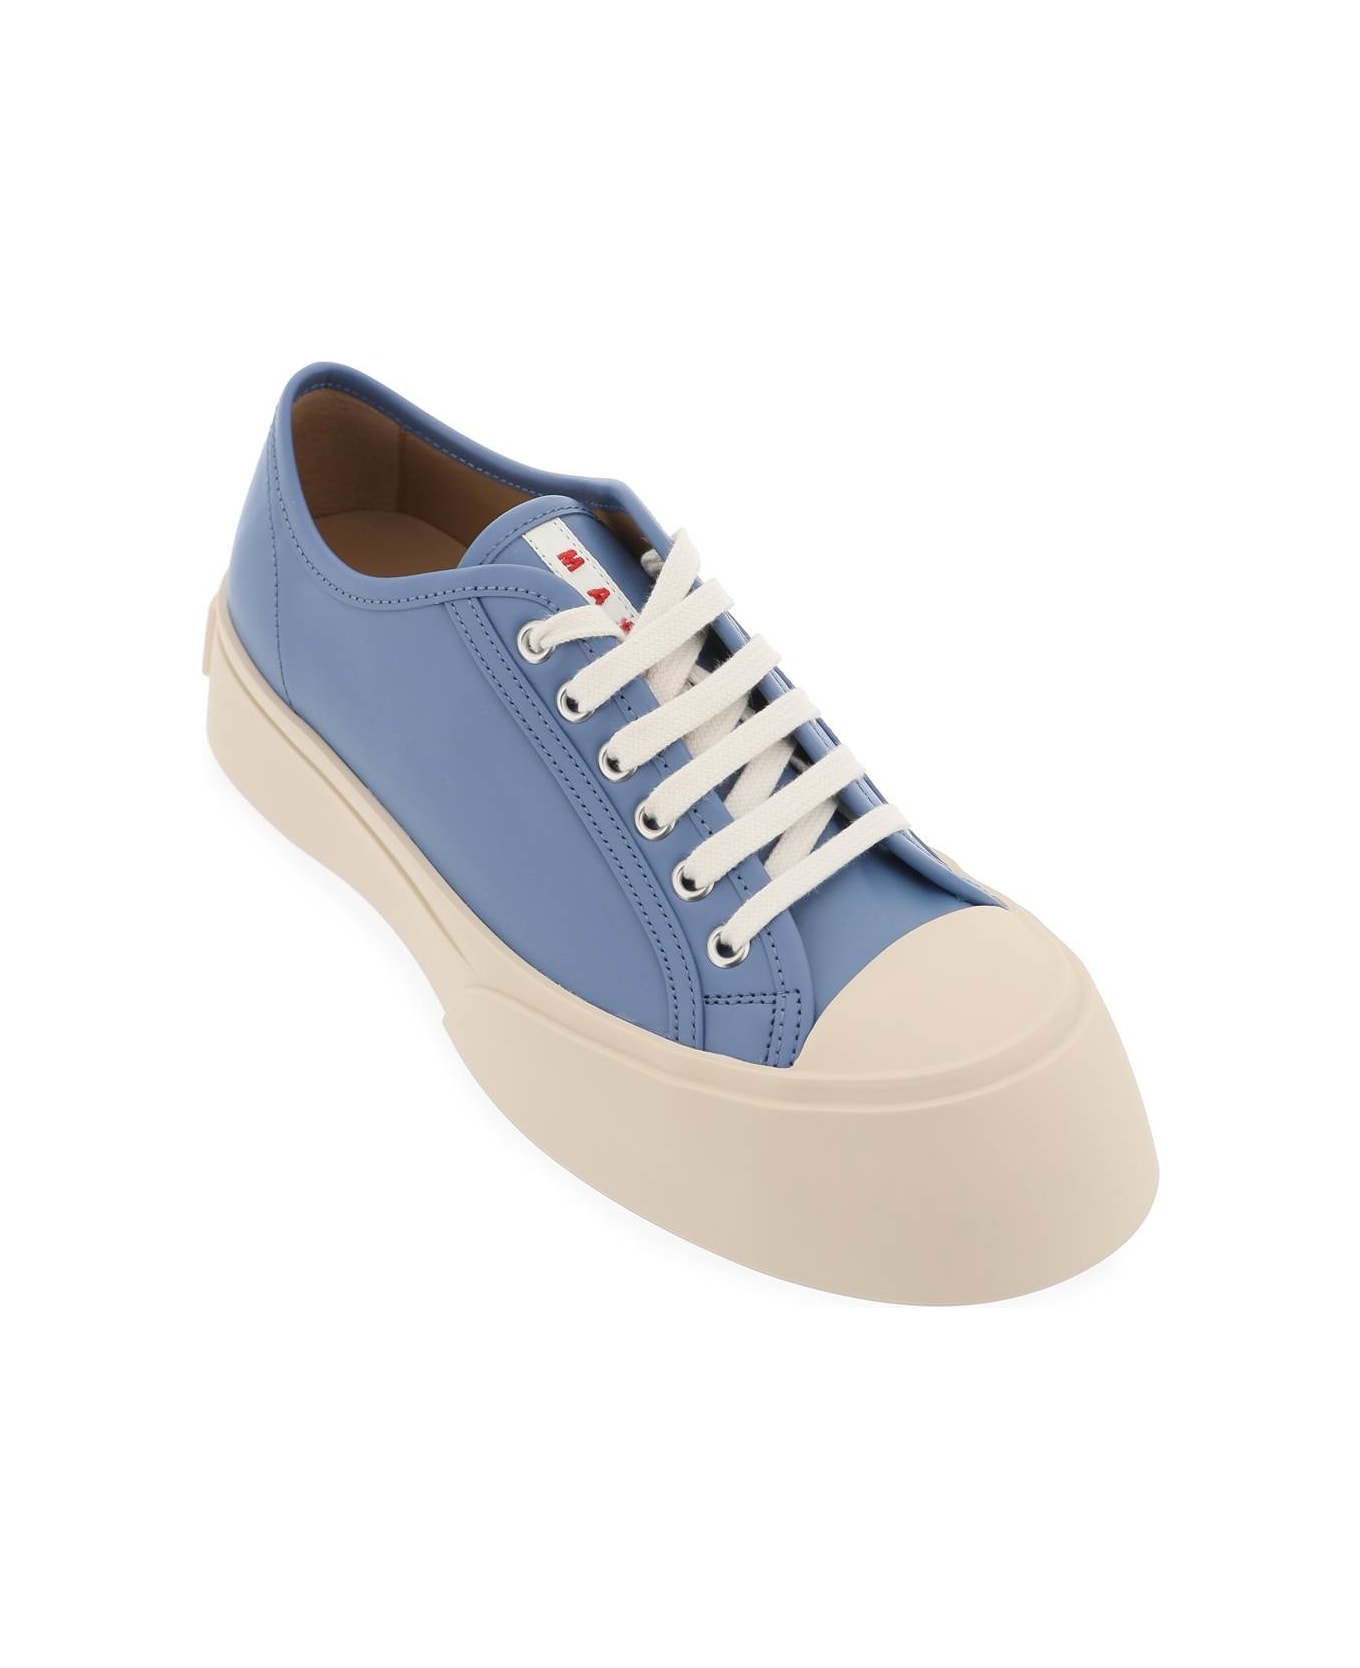 Marni Leather Pablo Sneakers - Gnawed Blue